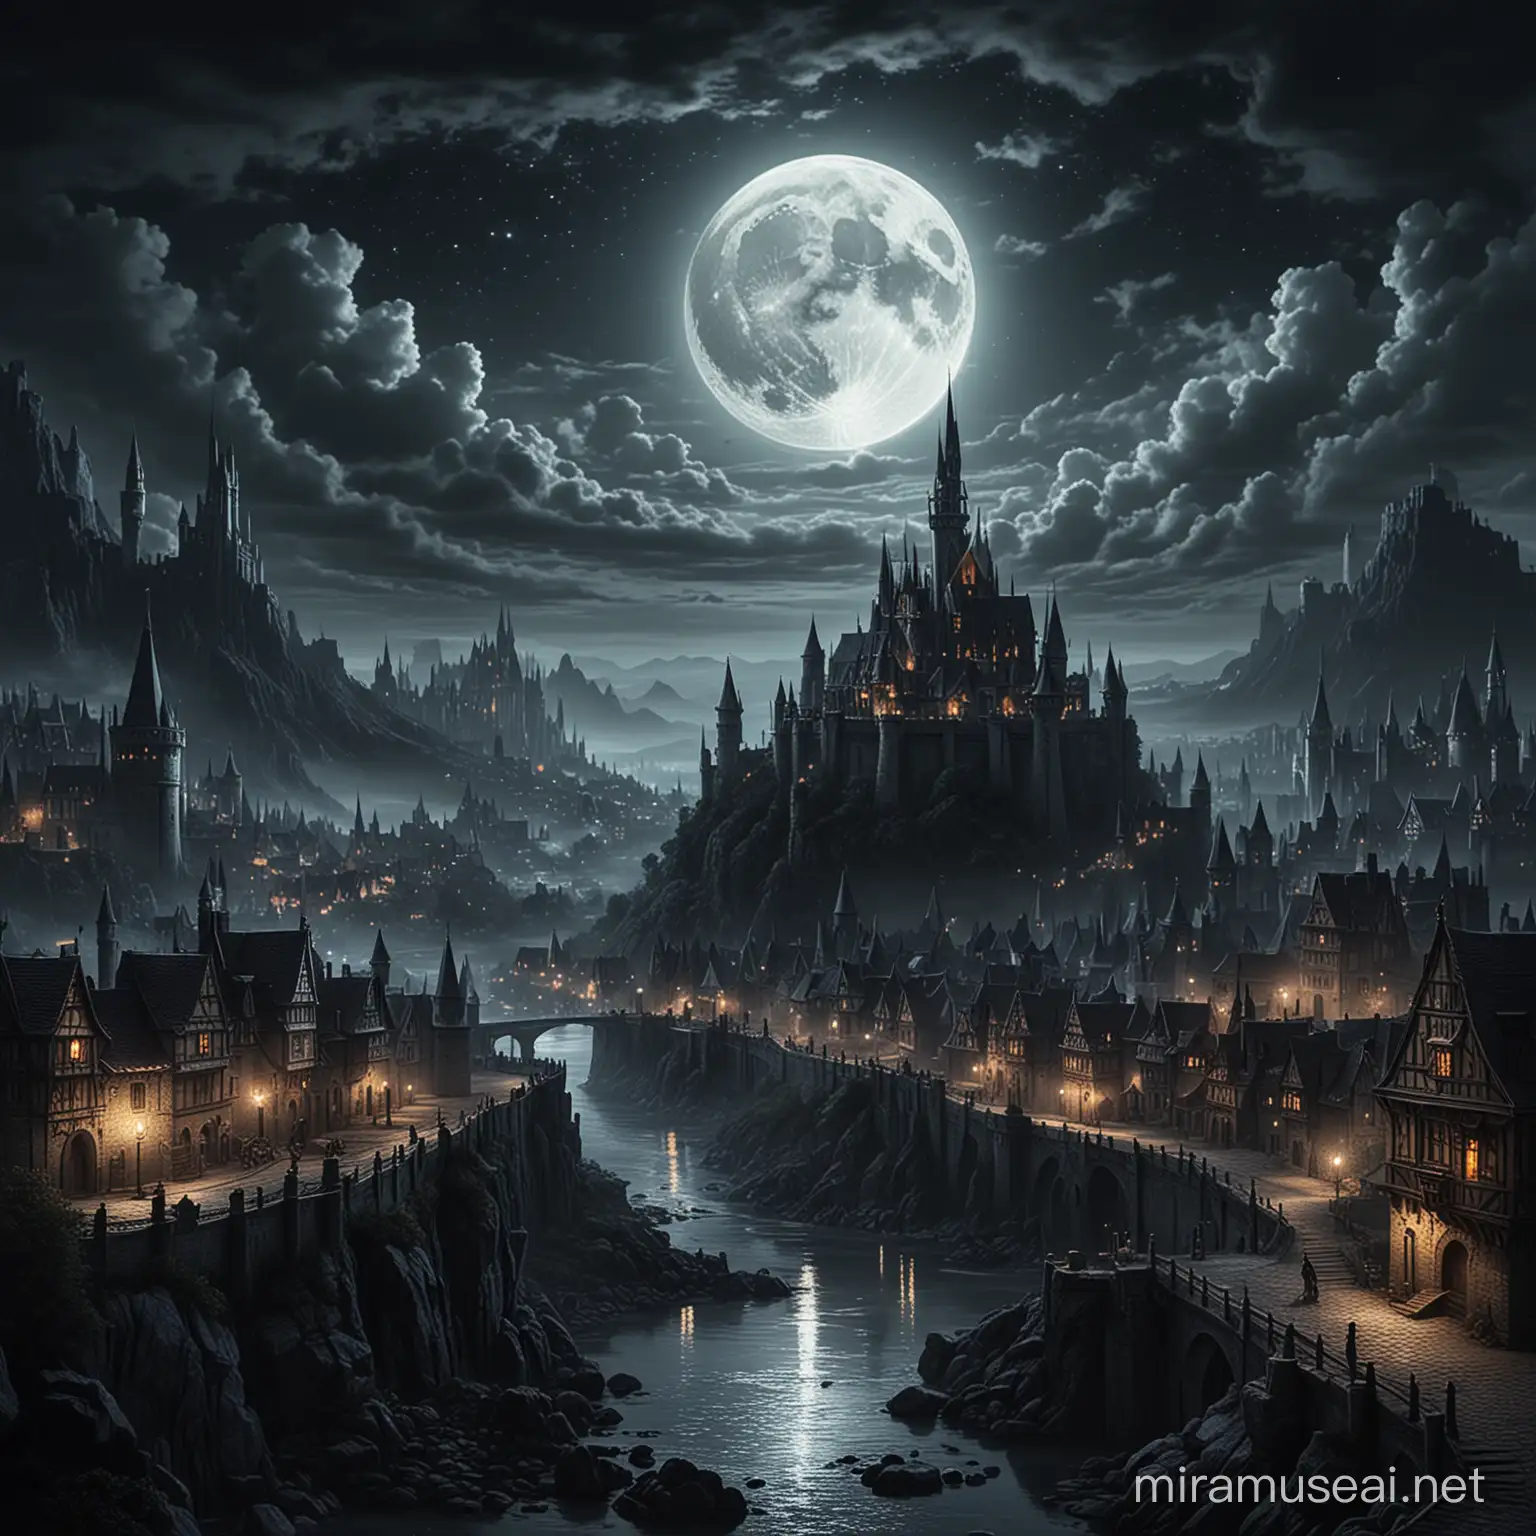 a dark,magic and fantasy city,with a castle in the distance,at night,with the moon,medieval style